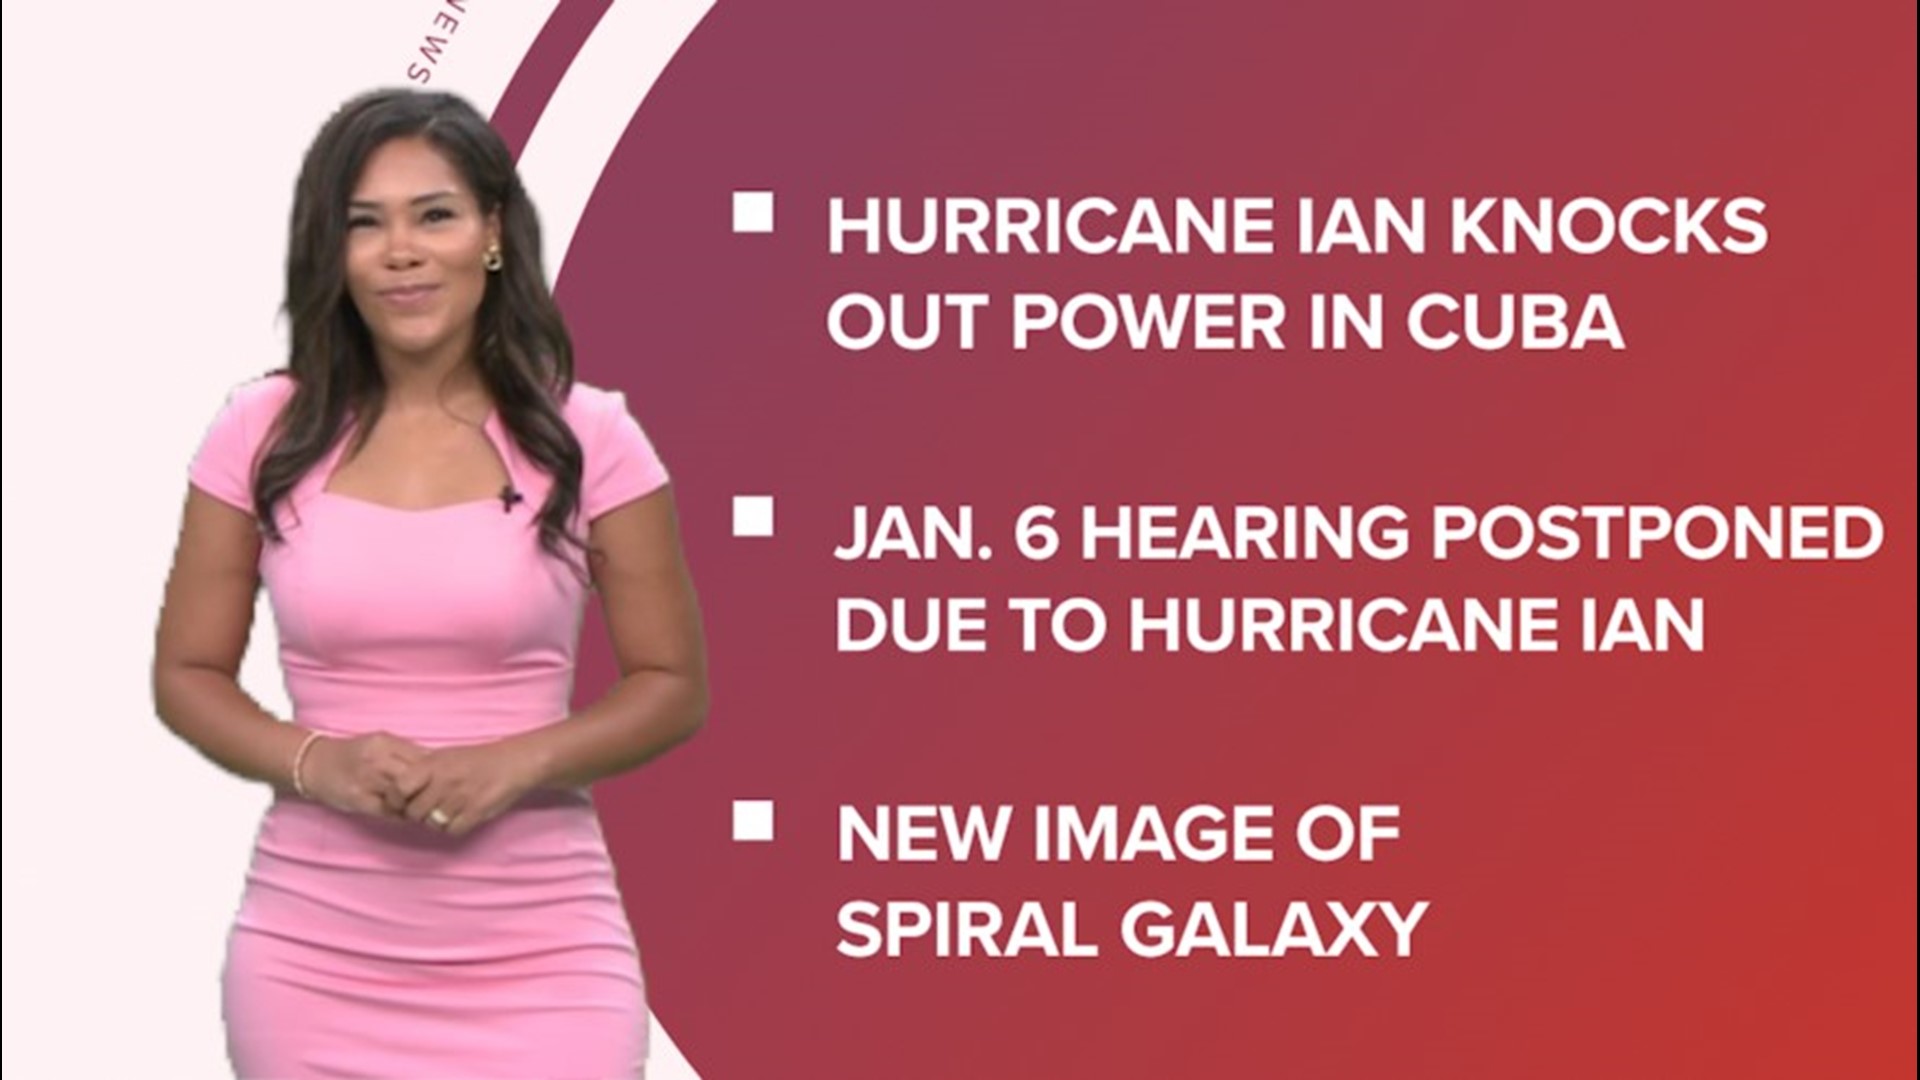 A look at what is happening in the news form Hurricane Ian knocking out power in Cuba and postponing Jan. 6 hearings to new images of a spiral galaxy from NASA.